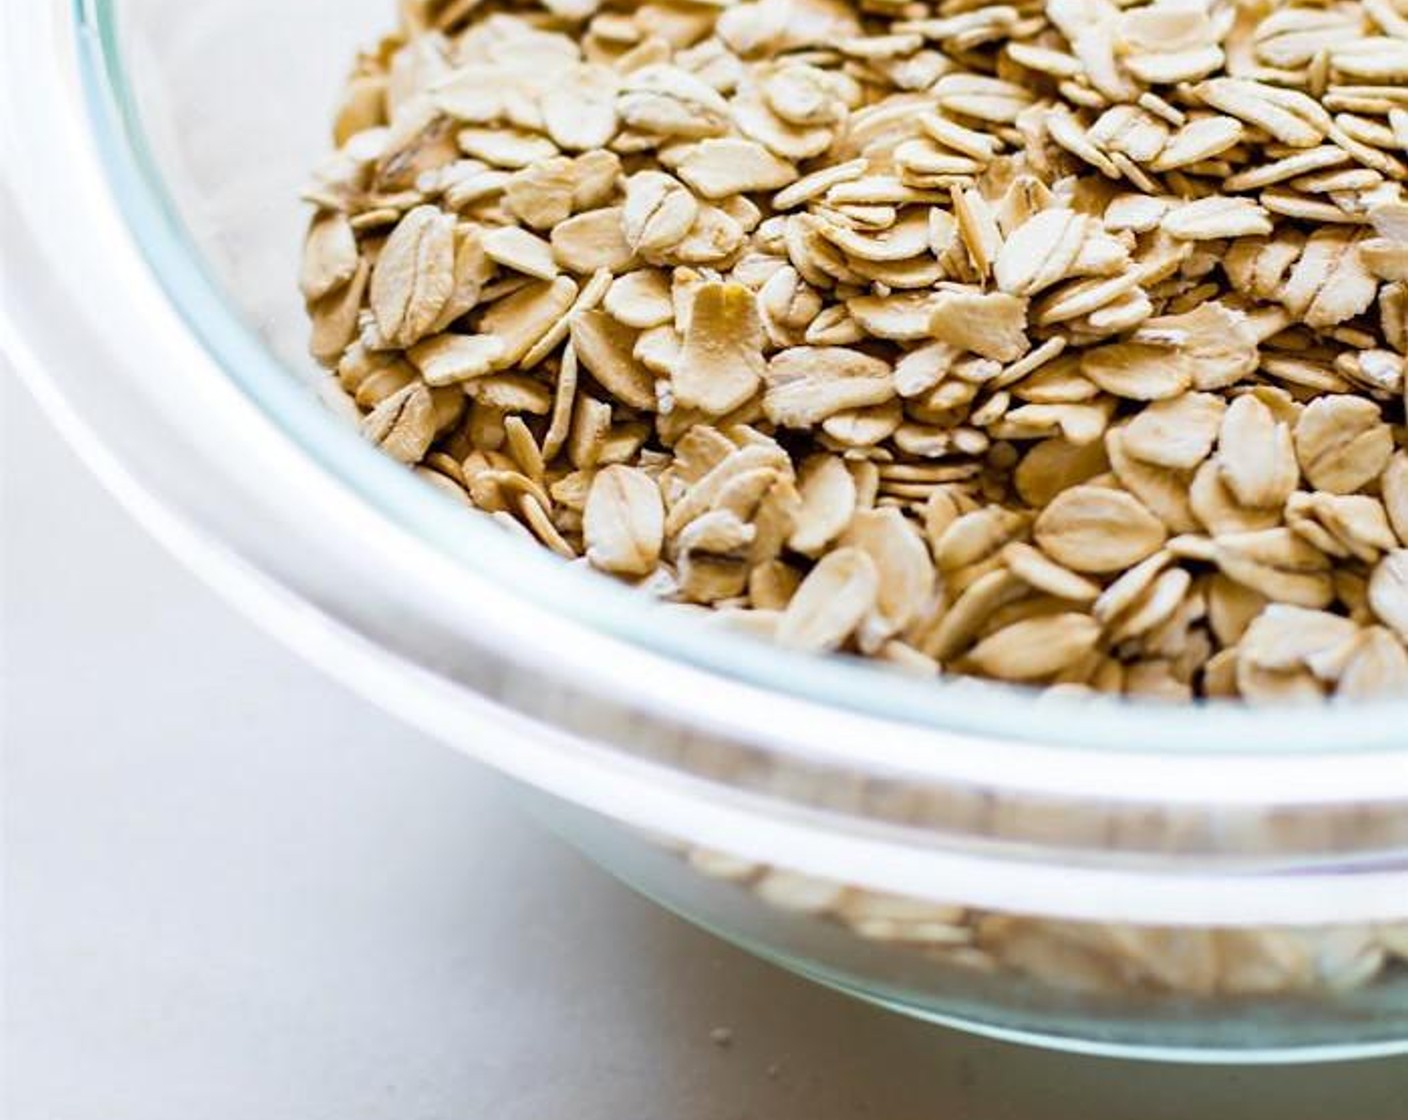 step 2 Place your Gluten-Free Rolled Oats (1 cup) in a blender or coffee grinder and blend until a mealy flour is formed. Pour into a large bowl.